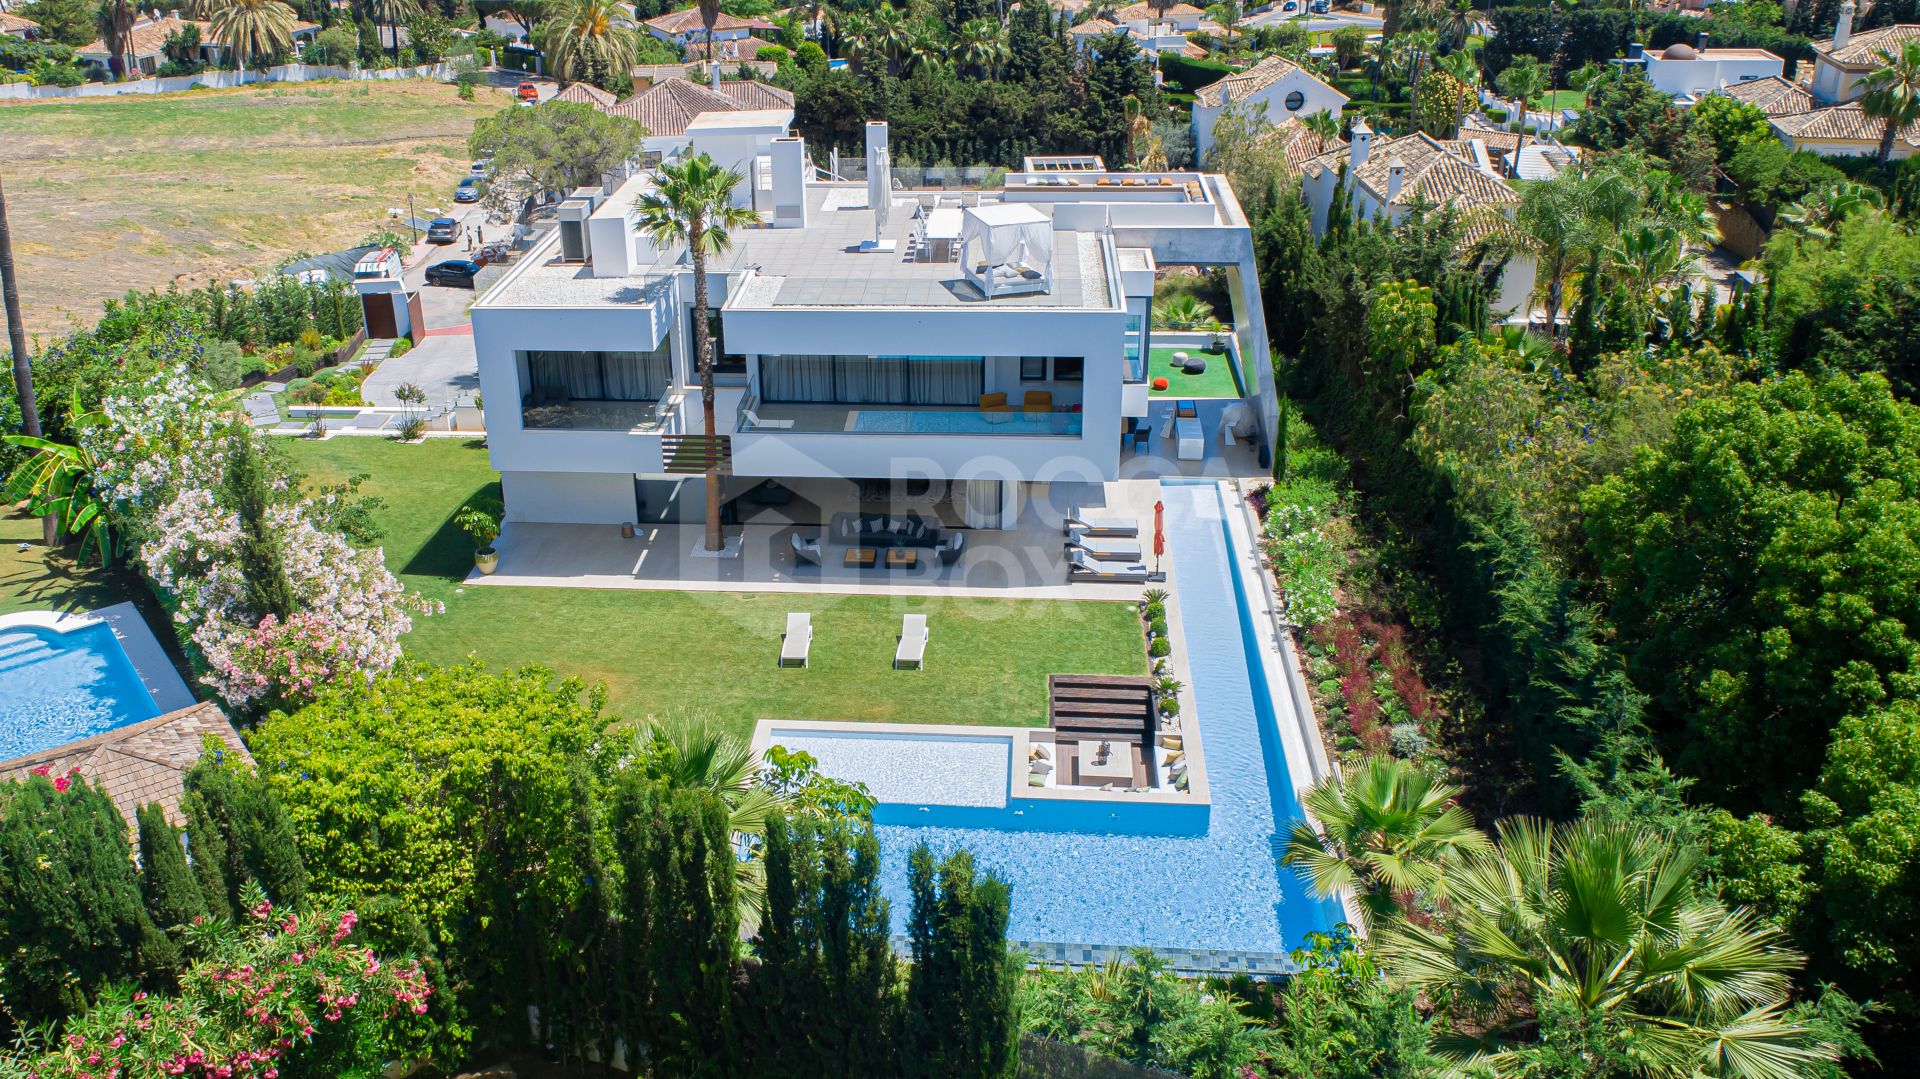 ULTRA MODERN VILLA AVAILABLE IN THE HEART OF NUEVA ANDALUCIA, JUST MINUTES FROM THE BEACH & THE FAMOUS PUERTO BANUS!